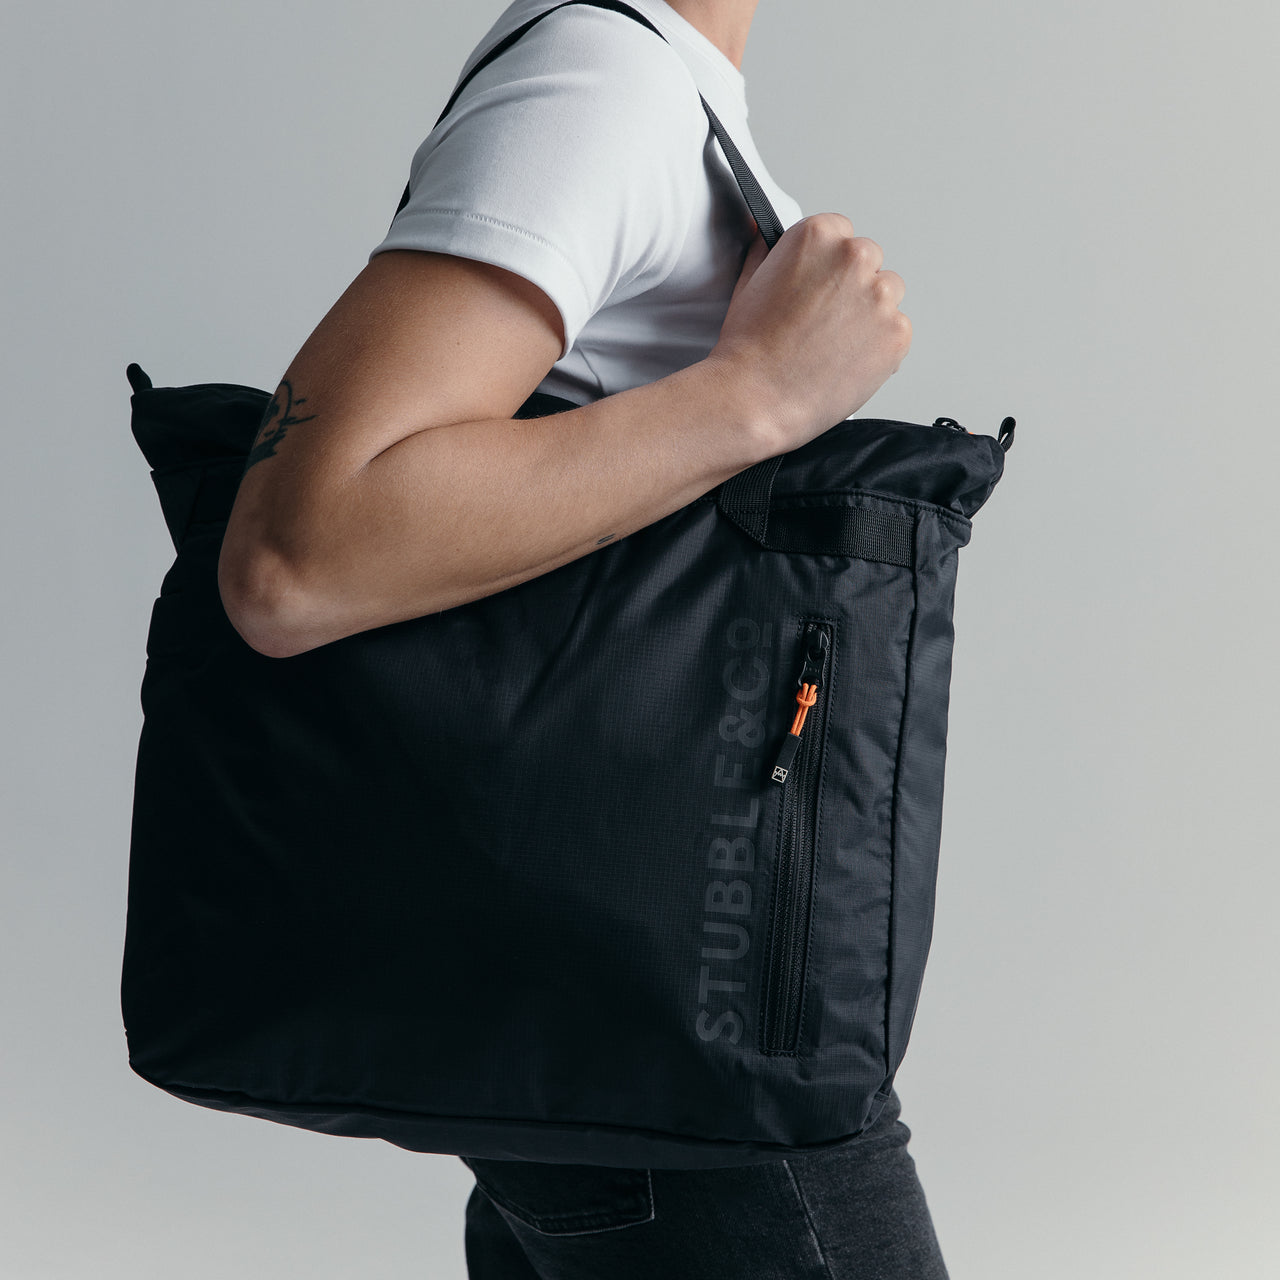 Person wearing the All Black packable Ultra Light Tote Bag